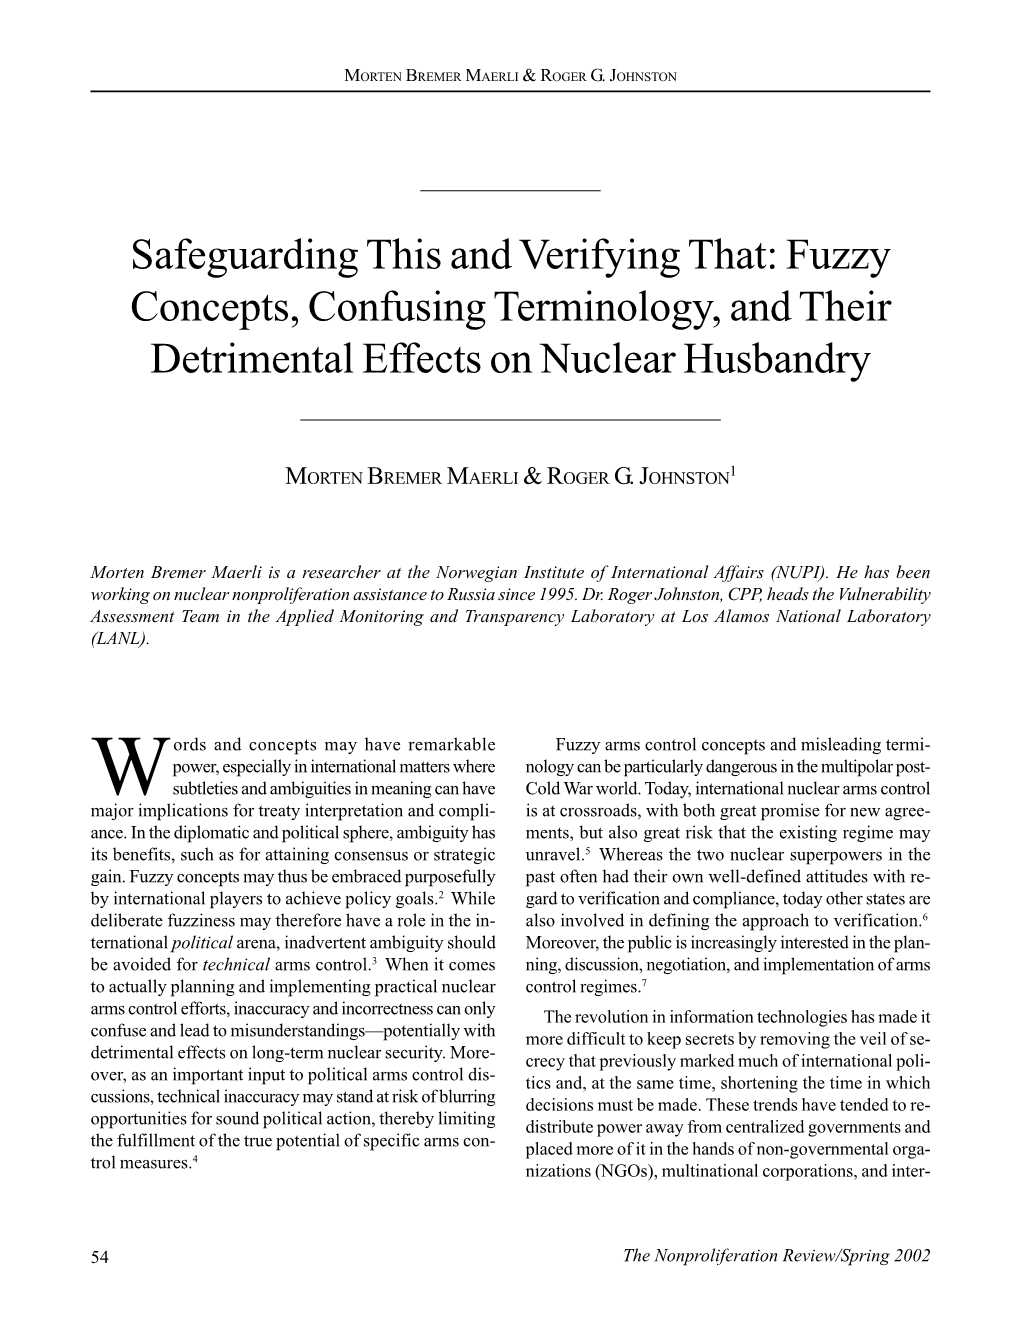 Safeguarding This and Verifying That: Fuzzy Concepts, Confusing Terminology, and Their Detrimental Effects on Nuclear Husbandry